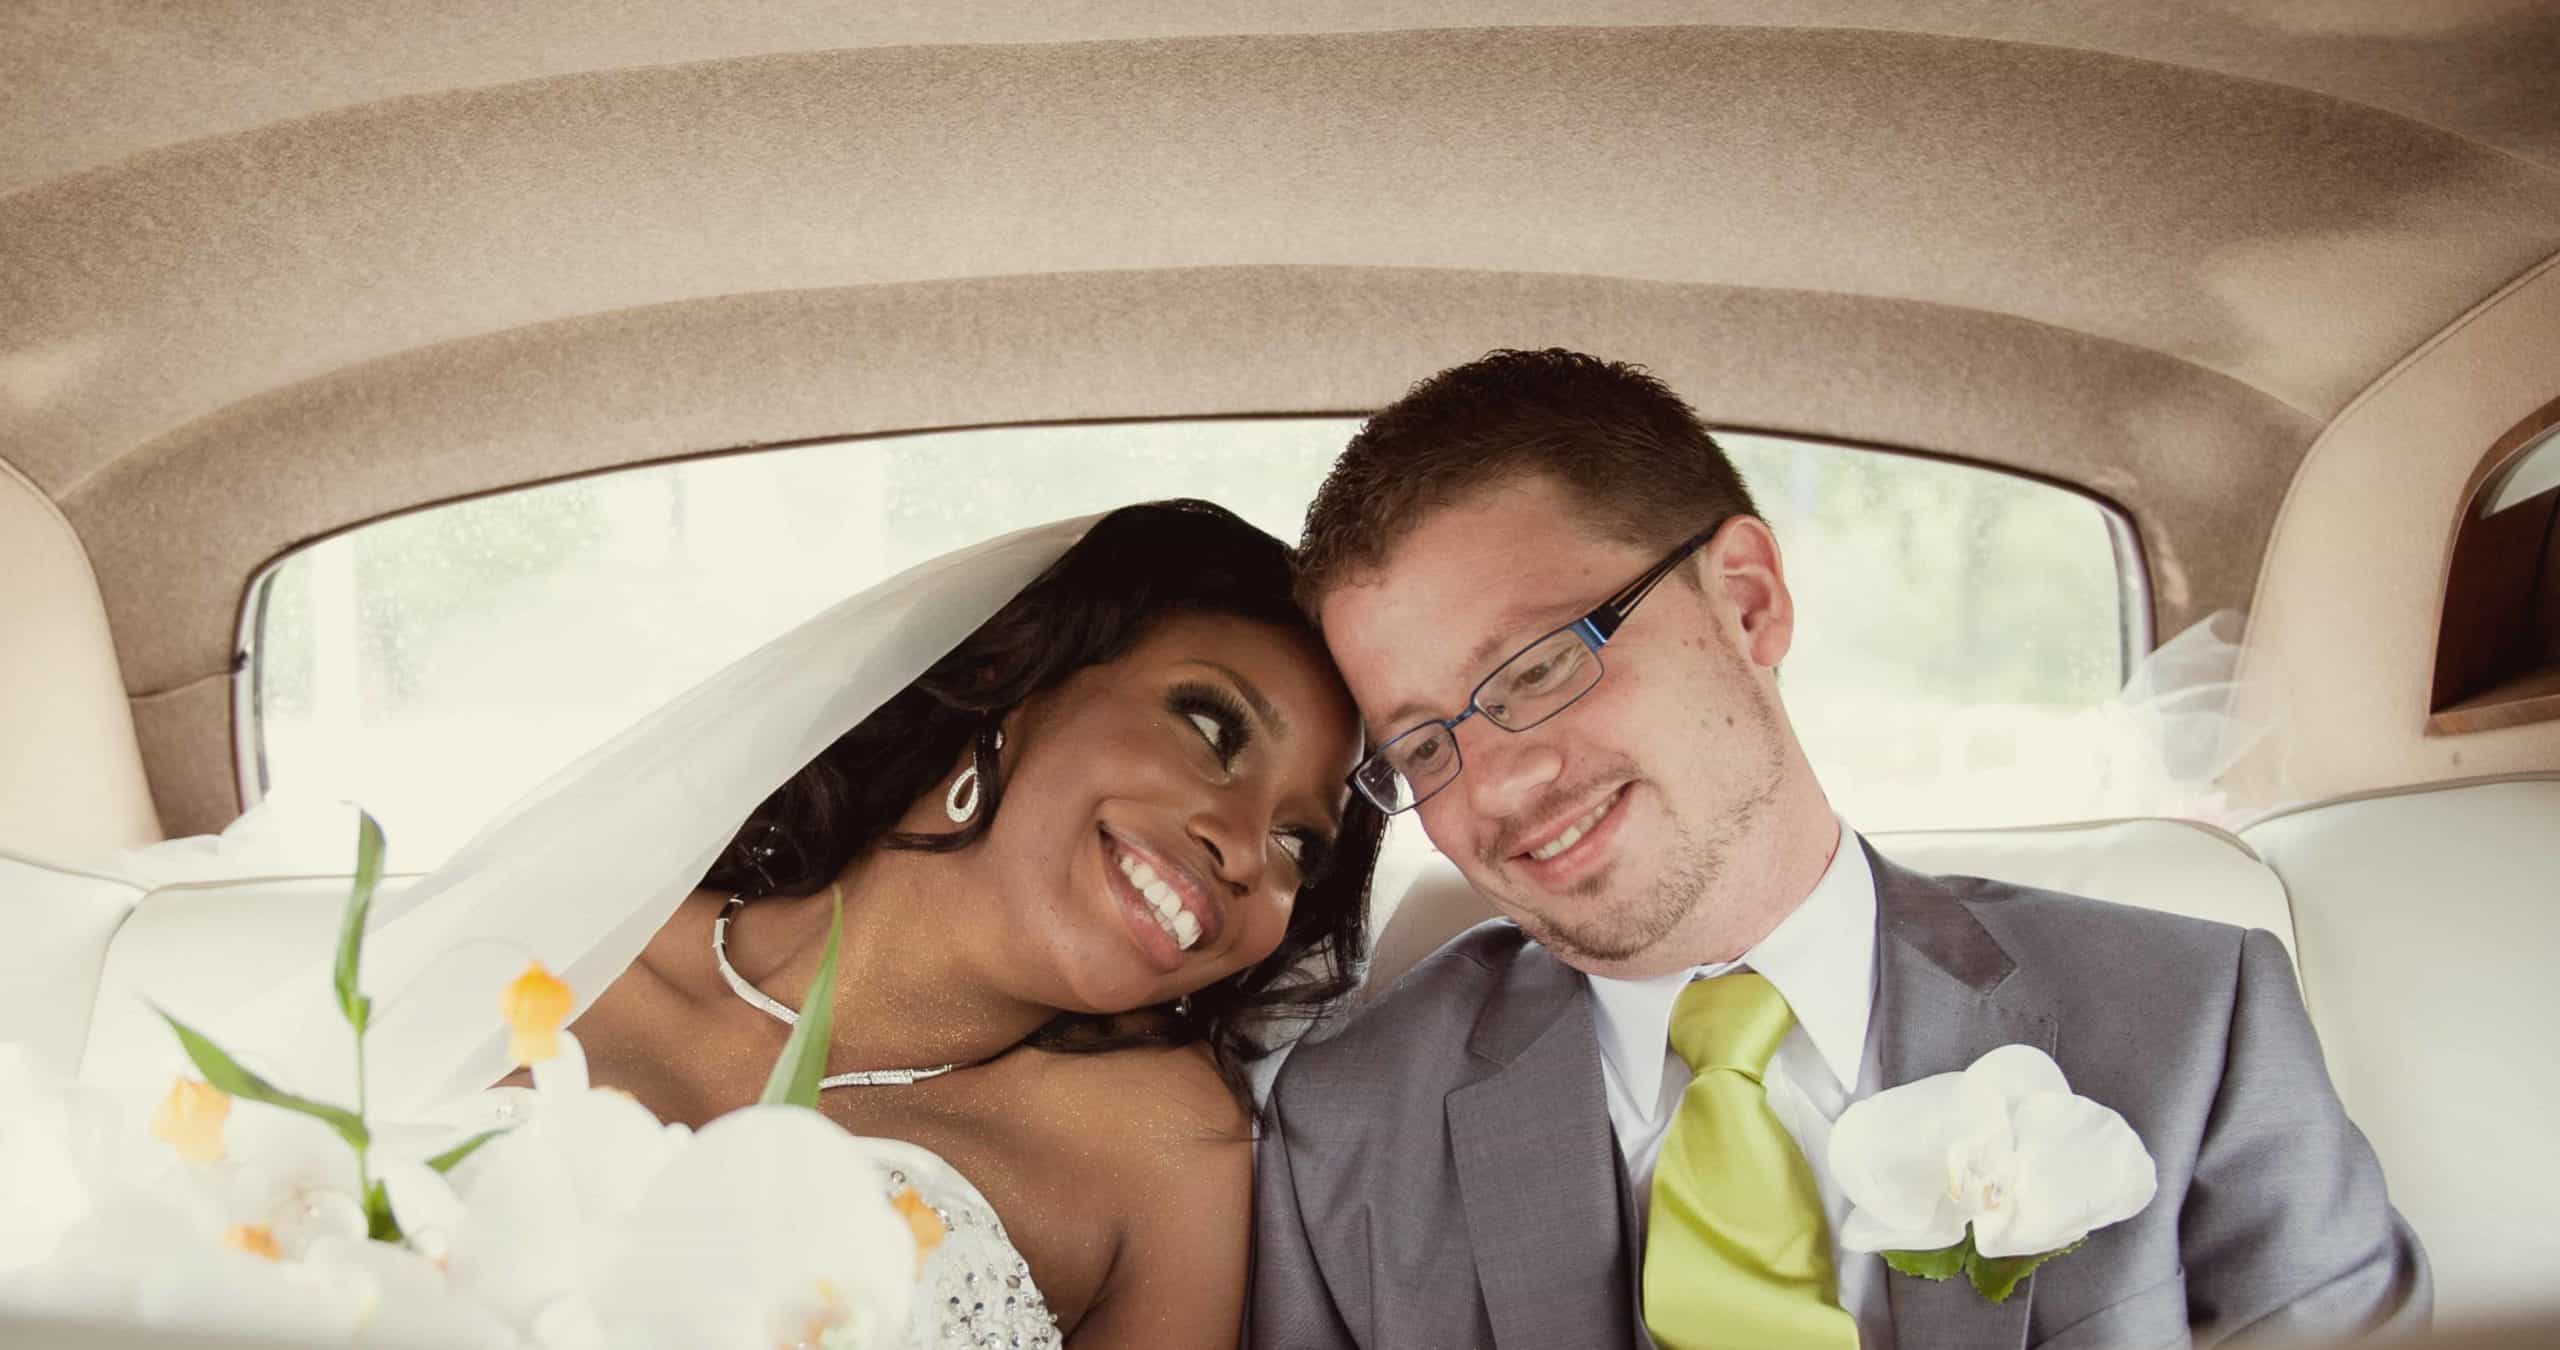 Wife Forced Interracial Gallery - 9 Reasons to Get Married - Focus on the Family